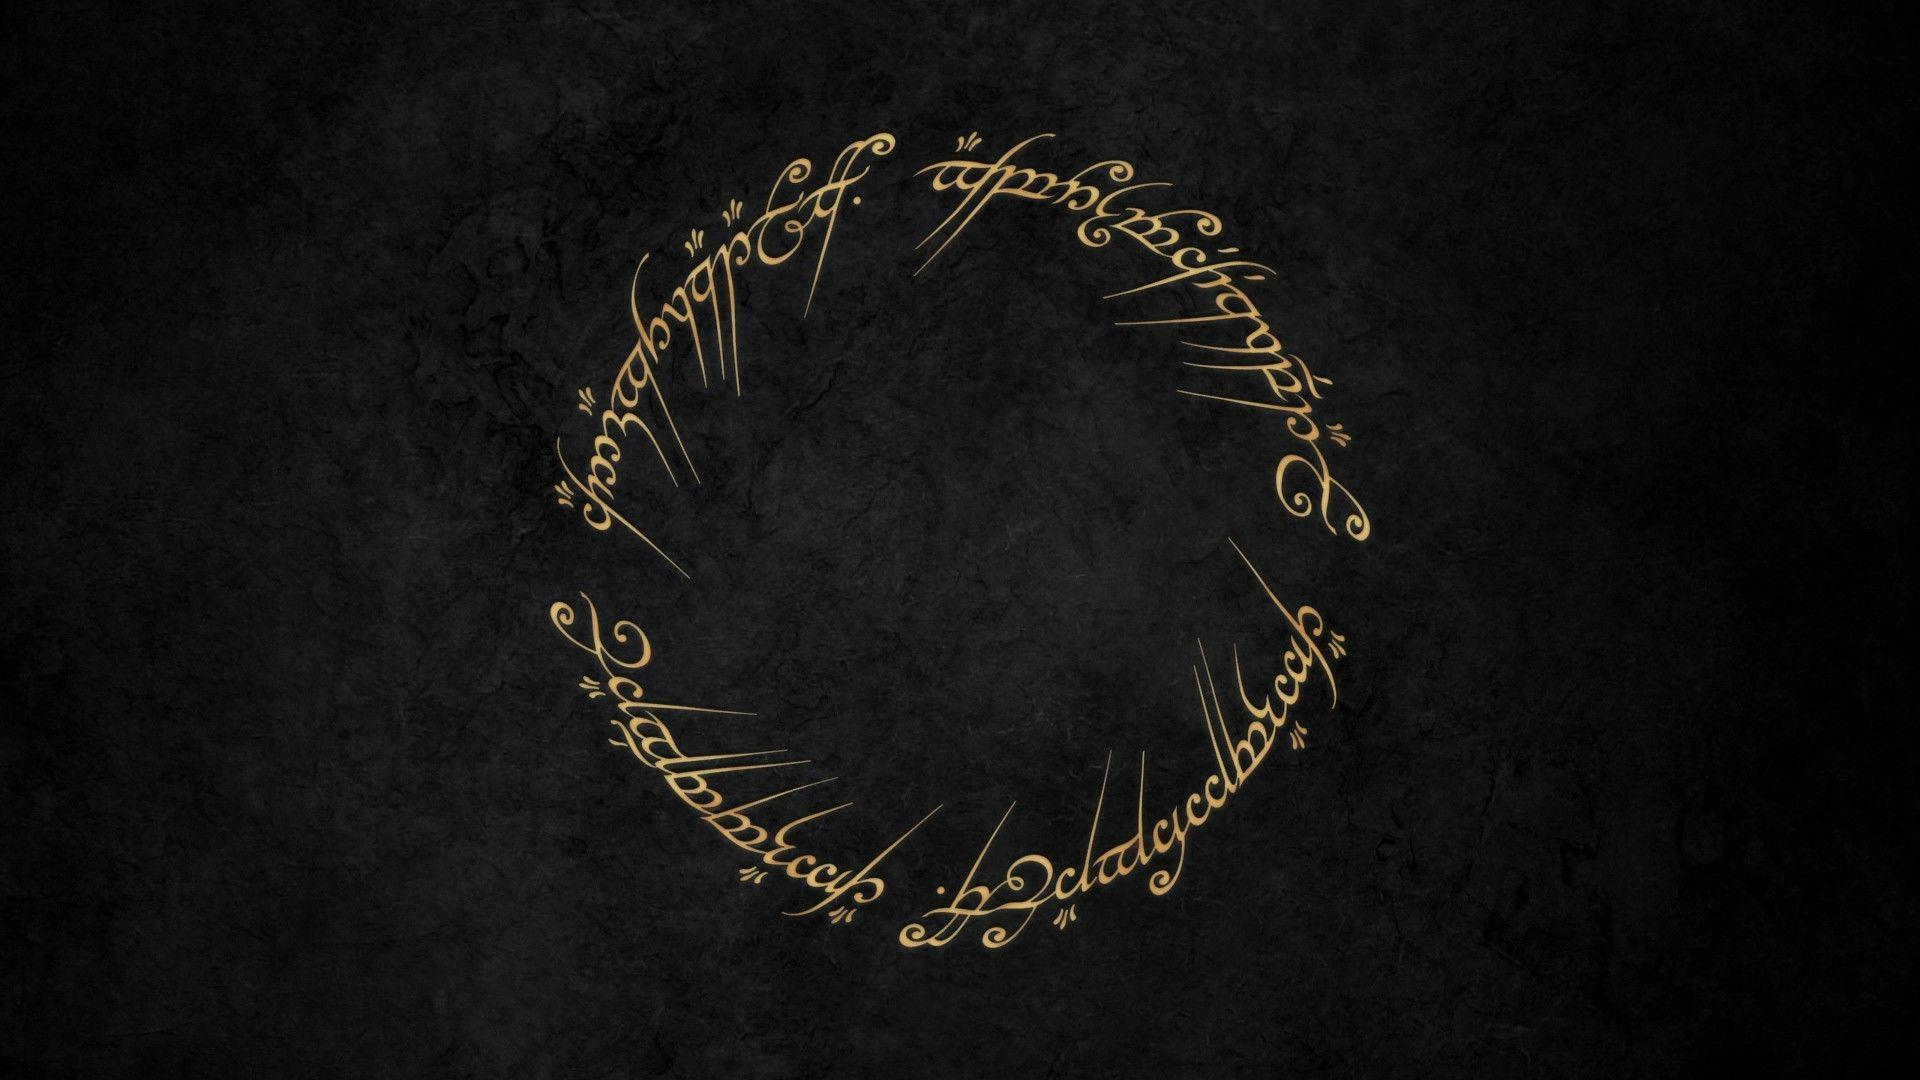 Tolkien Wallpaper. Lord of the rings, Lotr, One ring